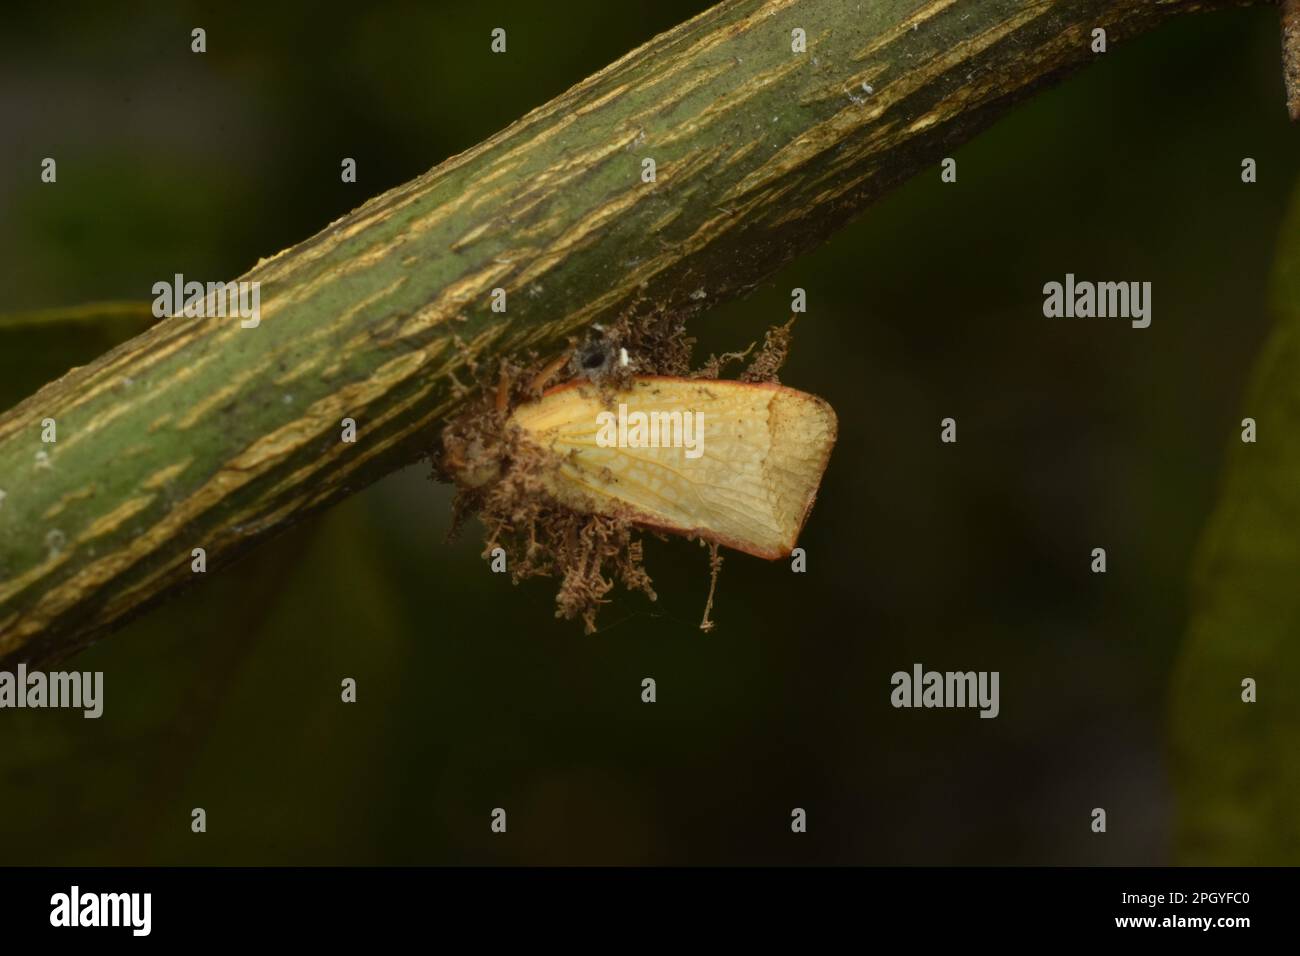 Planthopper attacked by fungi. Stock Photo